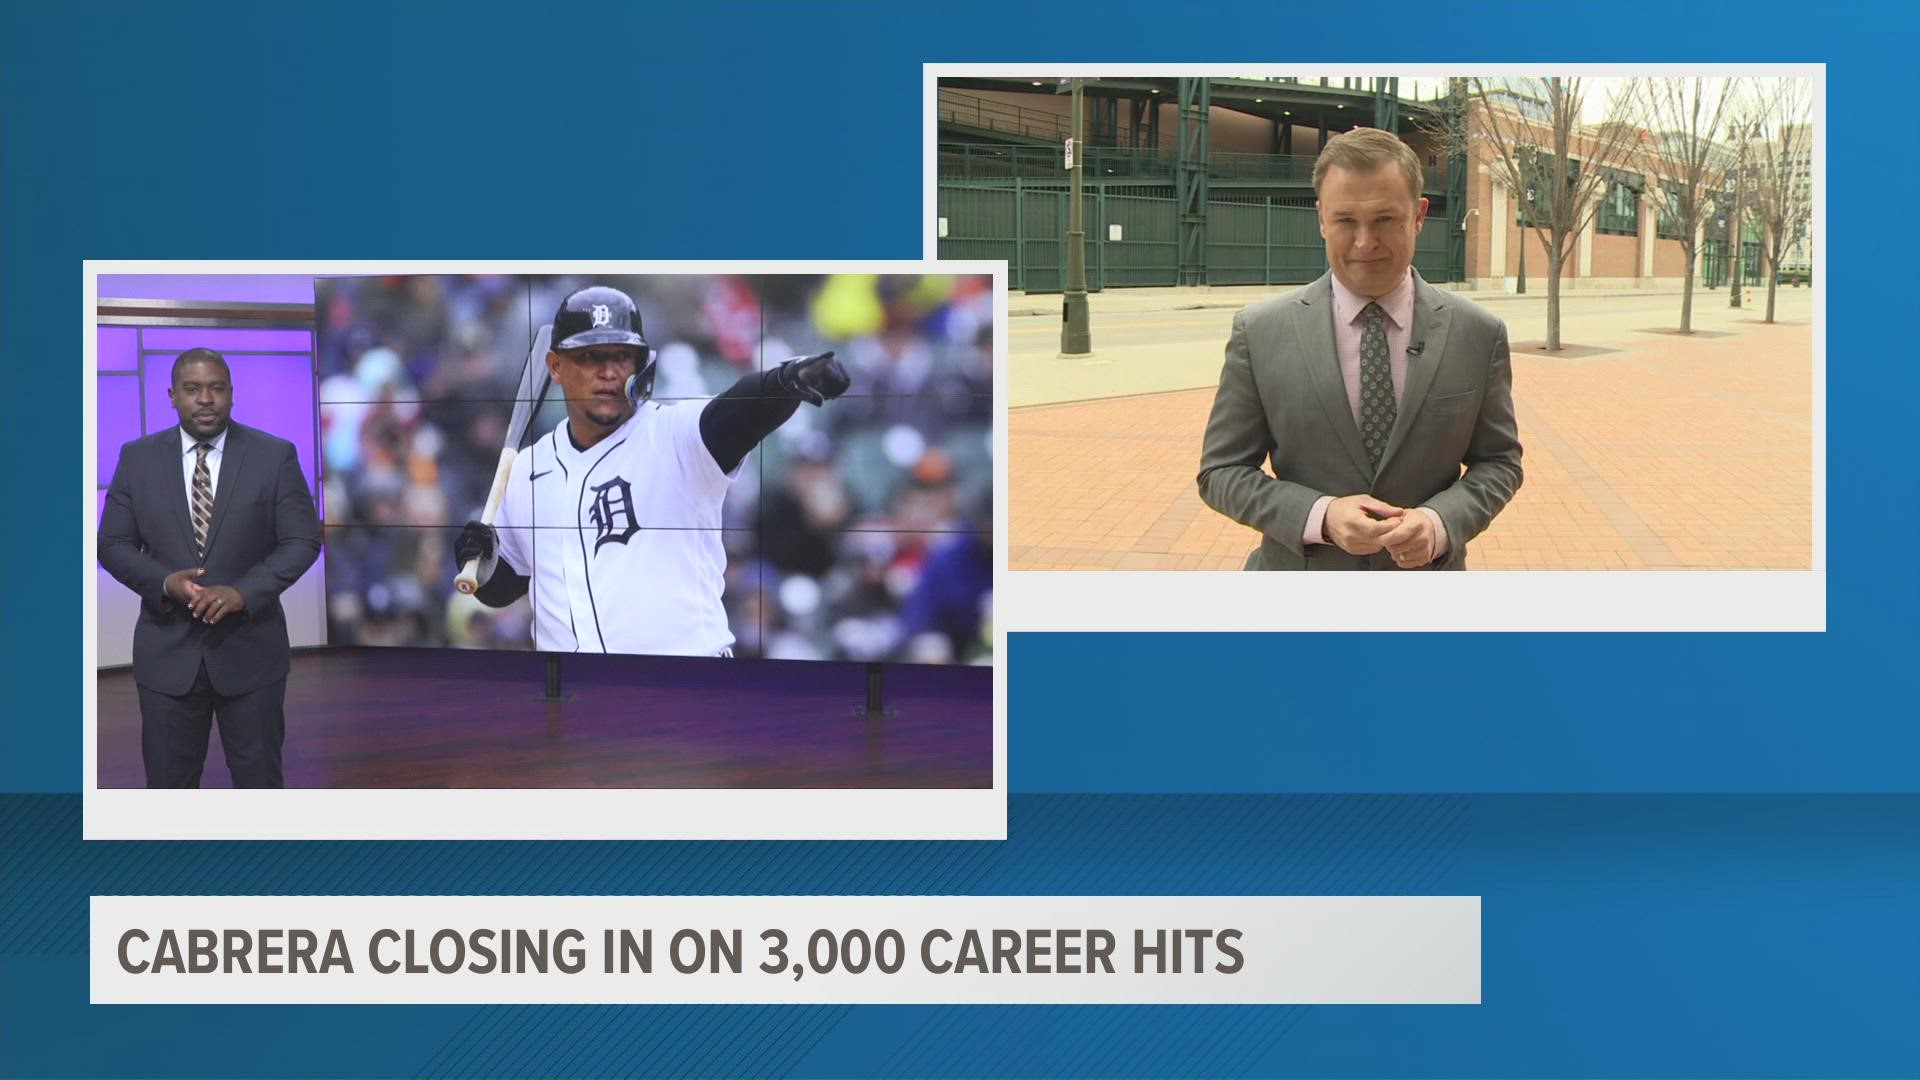 Miguel CAbrera is trying to become just the third player in Tigers history to reach the 3,000 career hit mark.